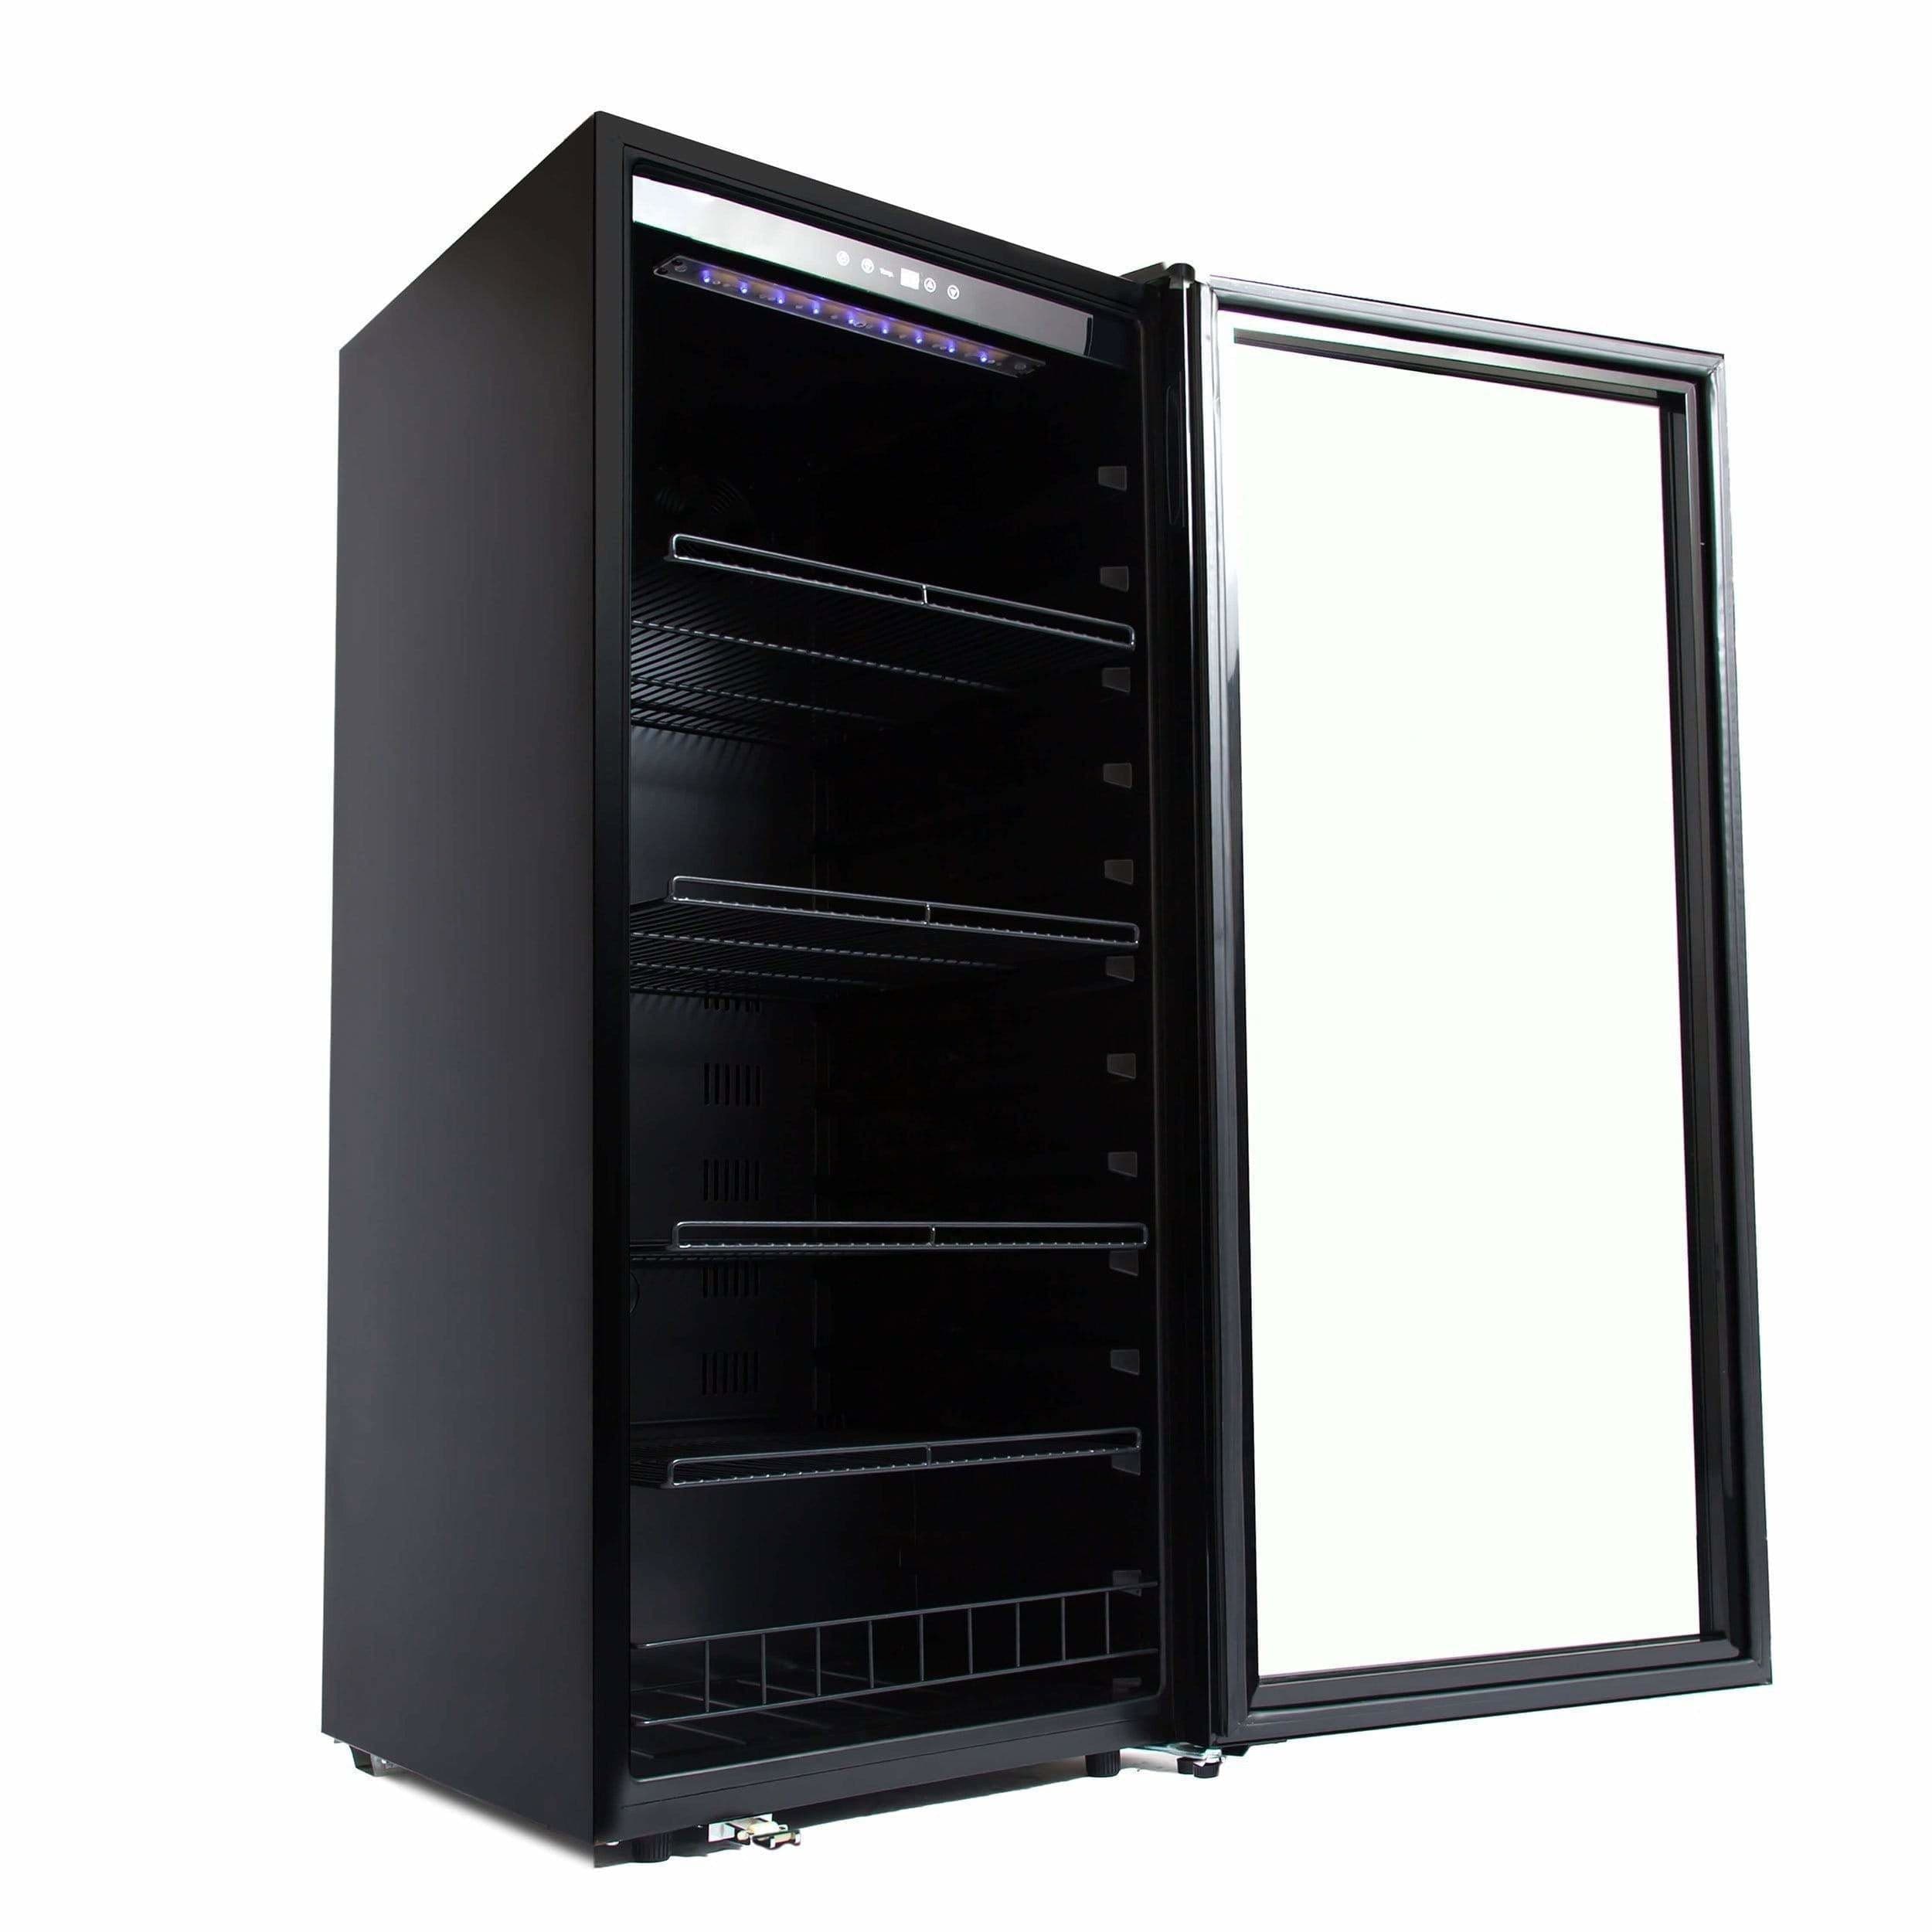 Whynter 124 Bottle Freestanding Wine Cabinet Refrigerator FWC-1201BB Wine Coolers FWC-1201BB Luxury Appliances Direct